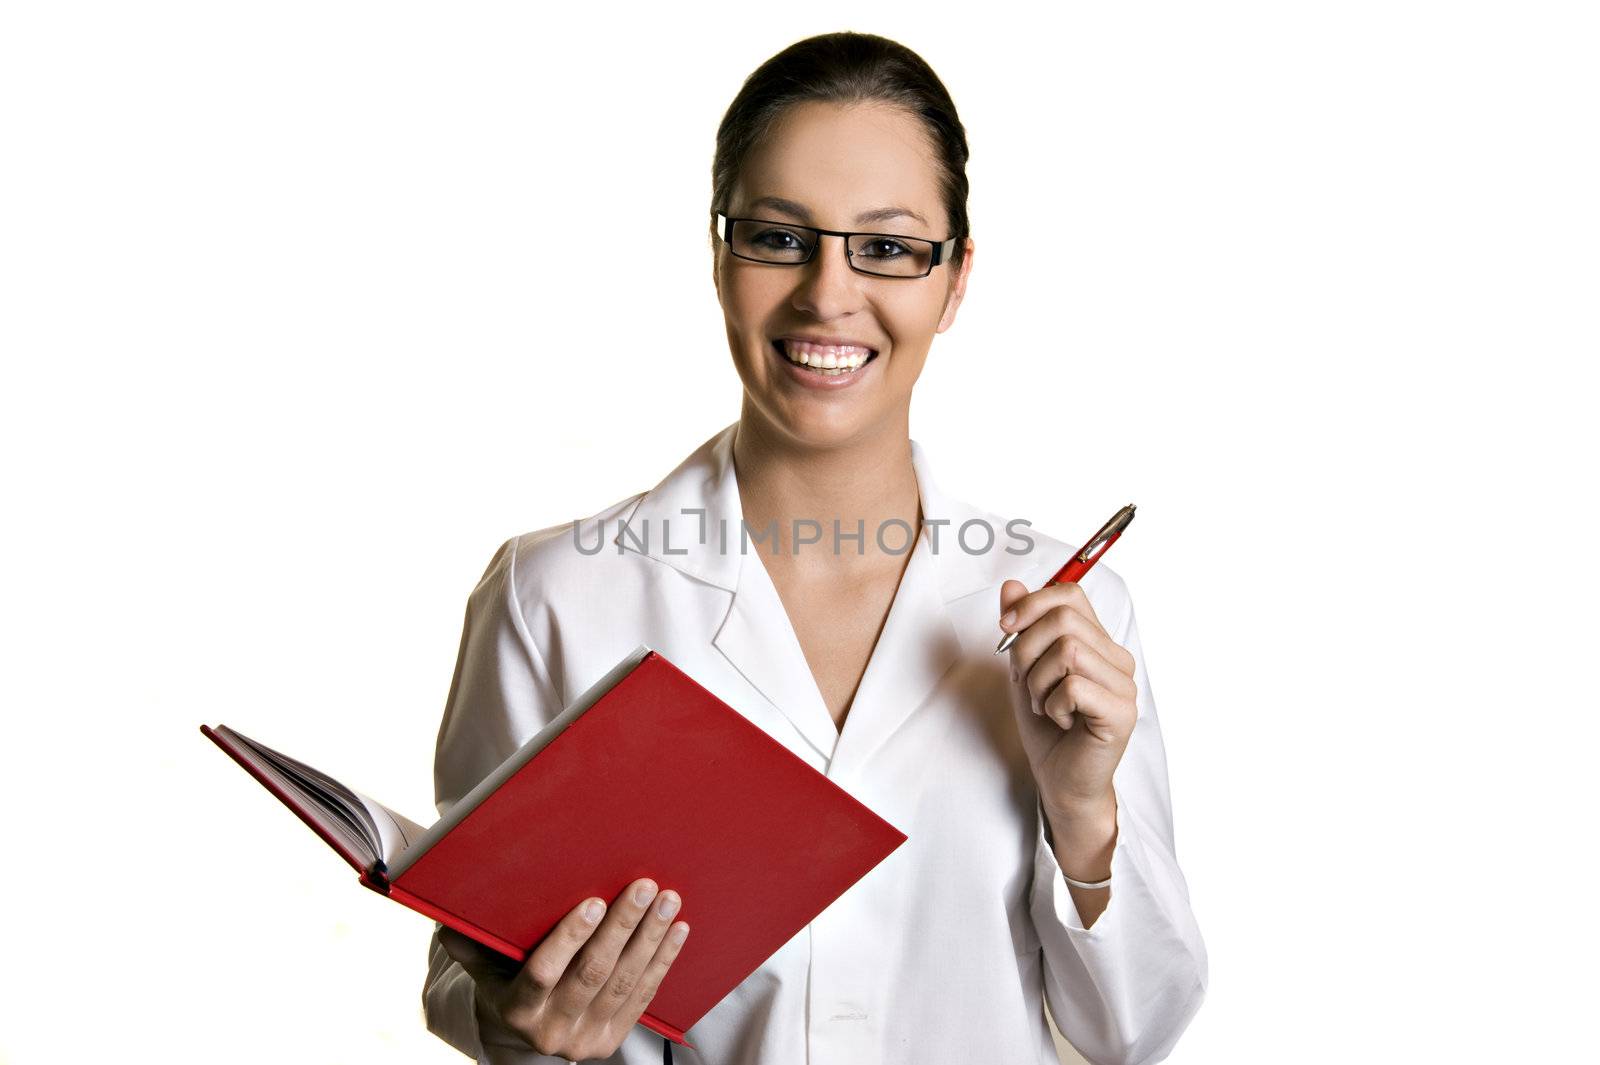 Young woman posing with note book by tish1